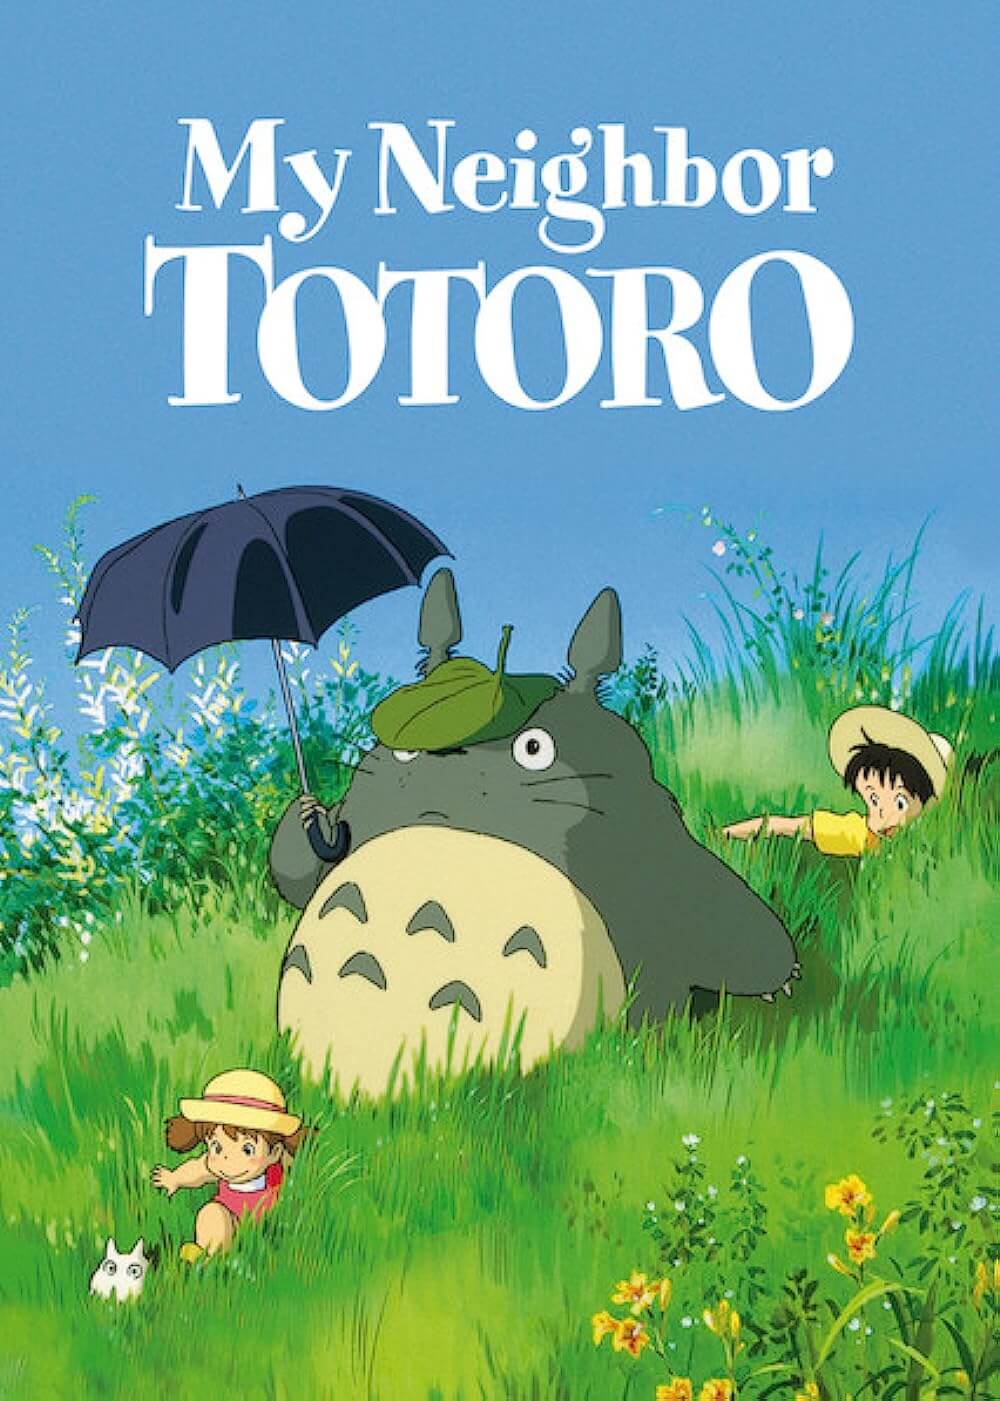 Watch My Neighbor Totoro, one of the best G rated movies for 5 year olds on Netflix.